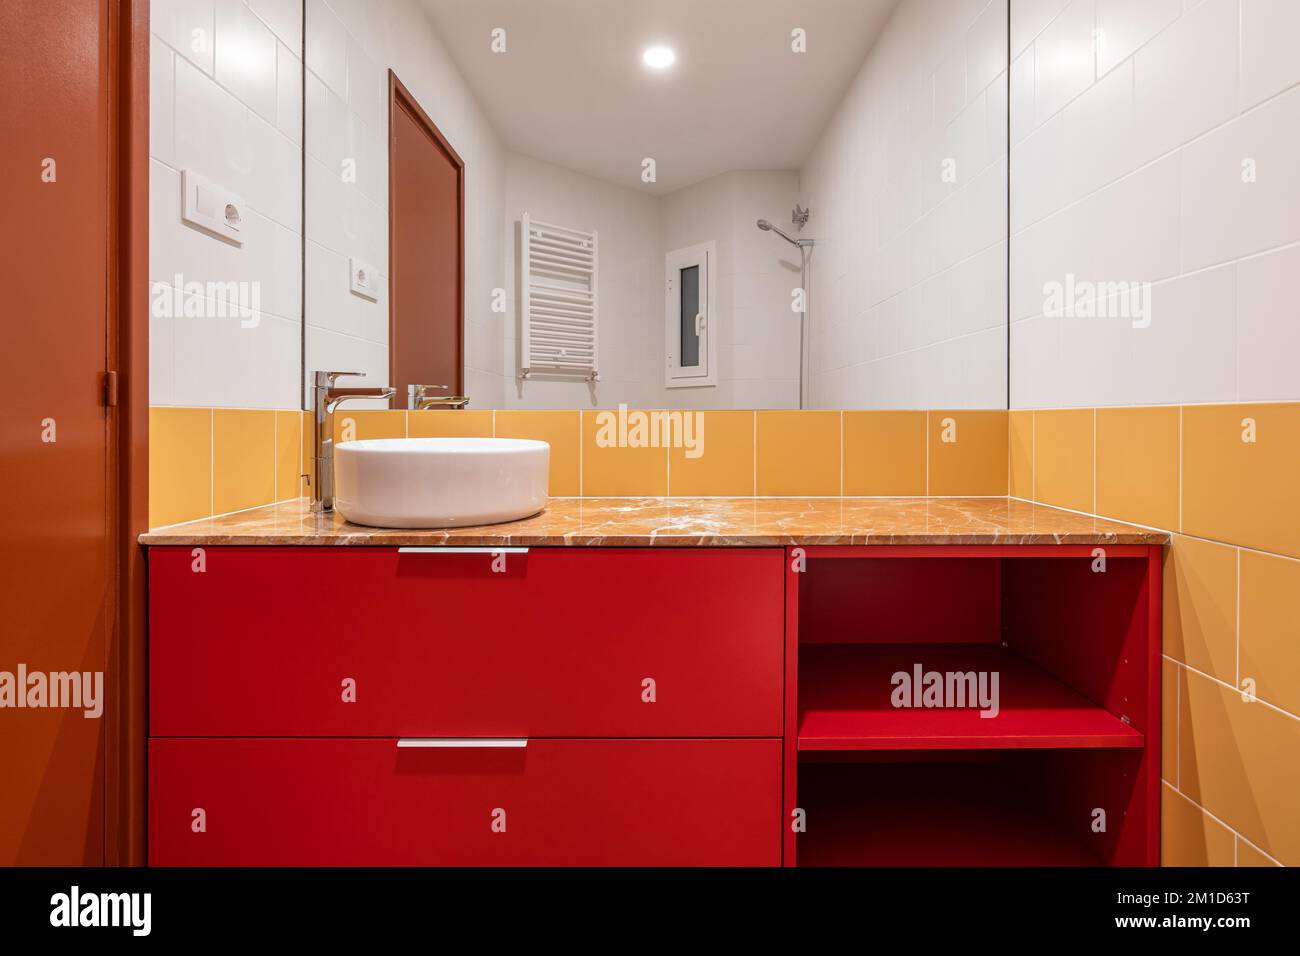 Overhead white sink on a red cabinet in a bright white and yellow bathroom White and yellow tiles on the wall and porcelain stoneware brown floor Stock Photo